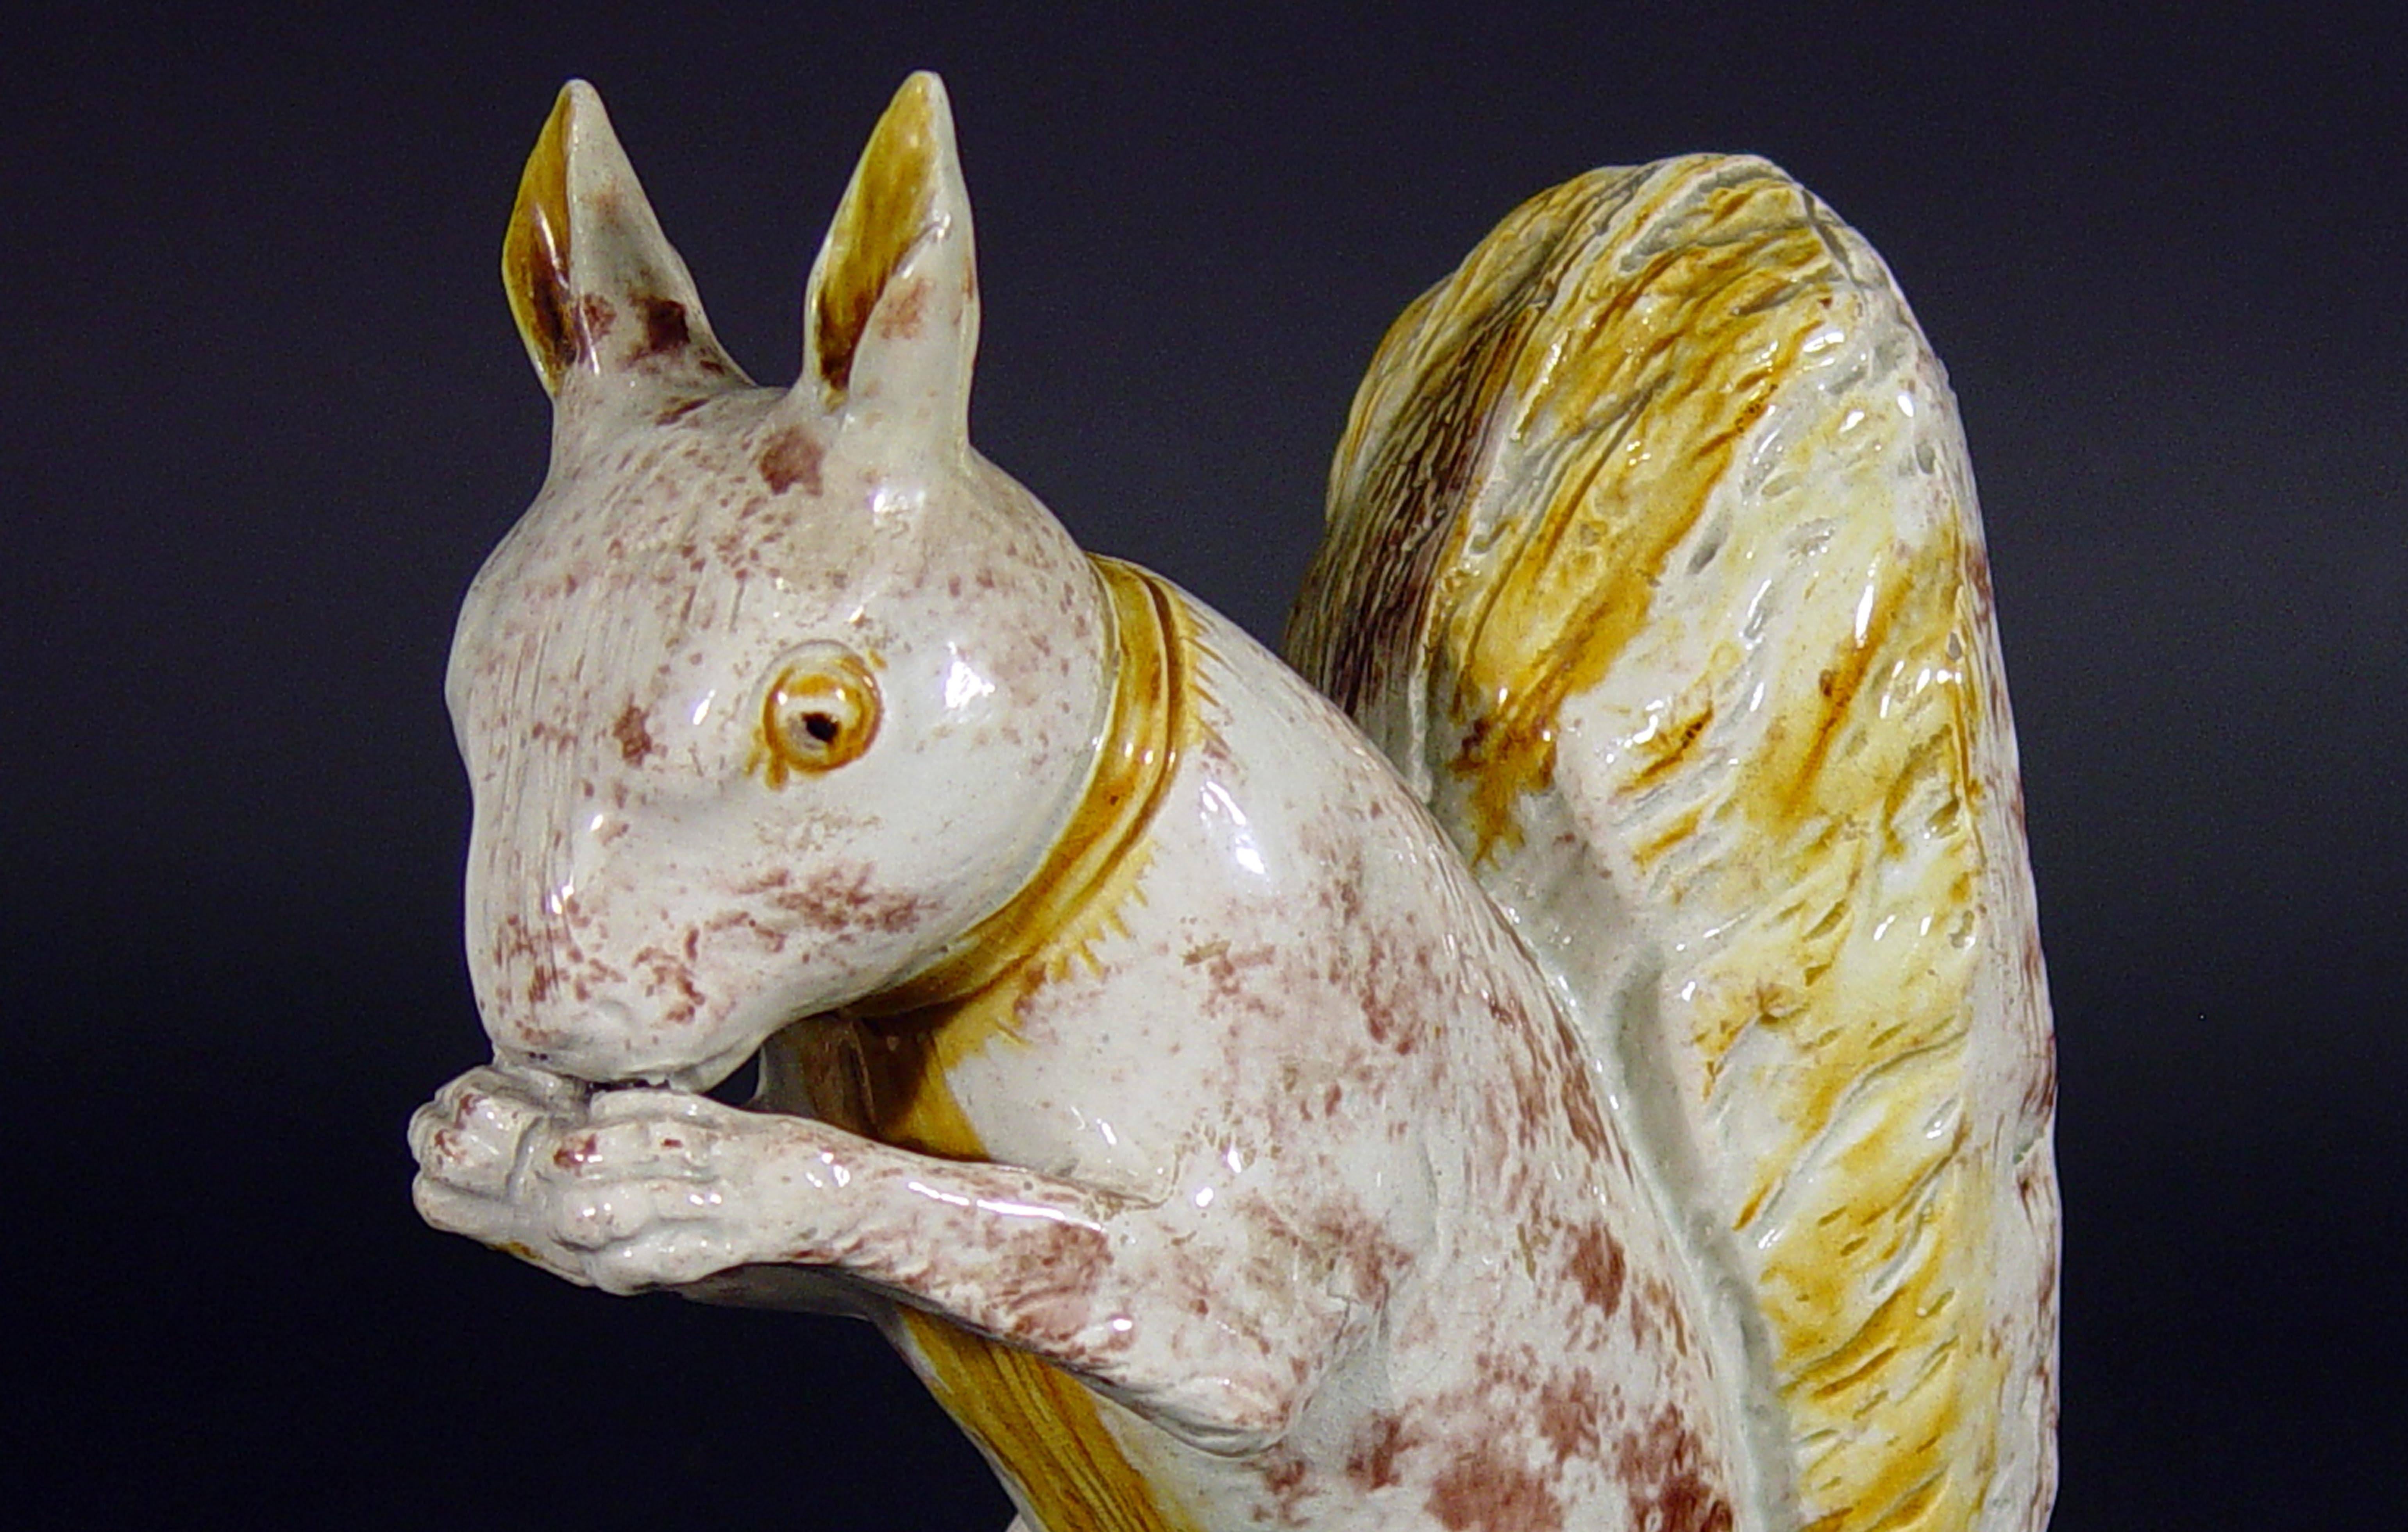 Rare early creamware model of a squirrel, 
Ralph Wood Type,
circa 1765-1780.

The pet squirrel is press moulded and is modelled with its paws holding a nut to its mouth. The squirrel is naturalistically coloured in a pale colour with patches of